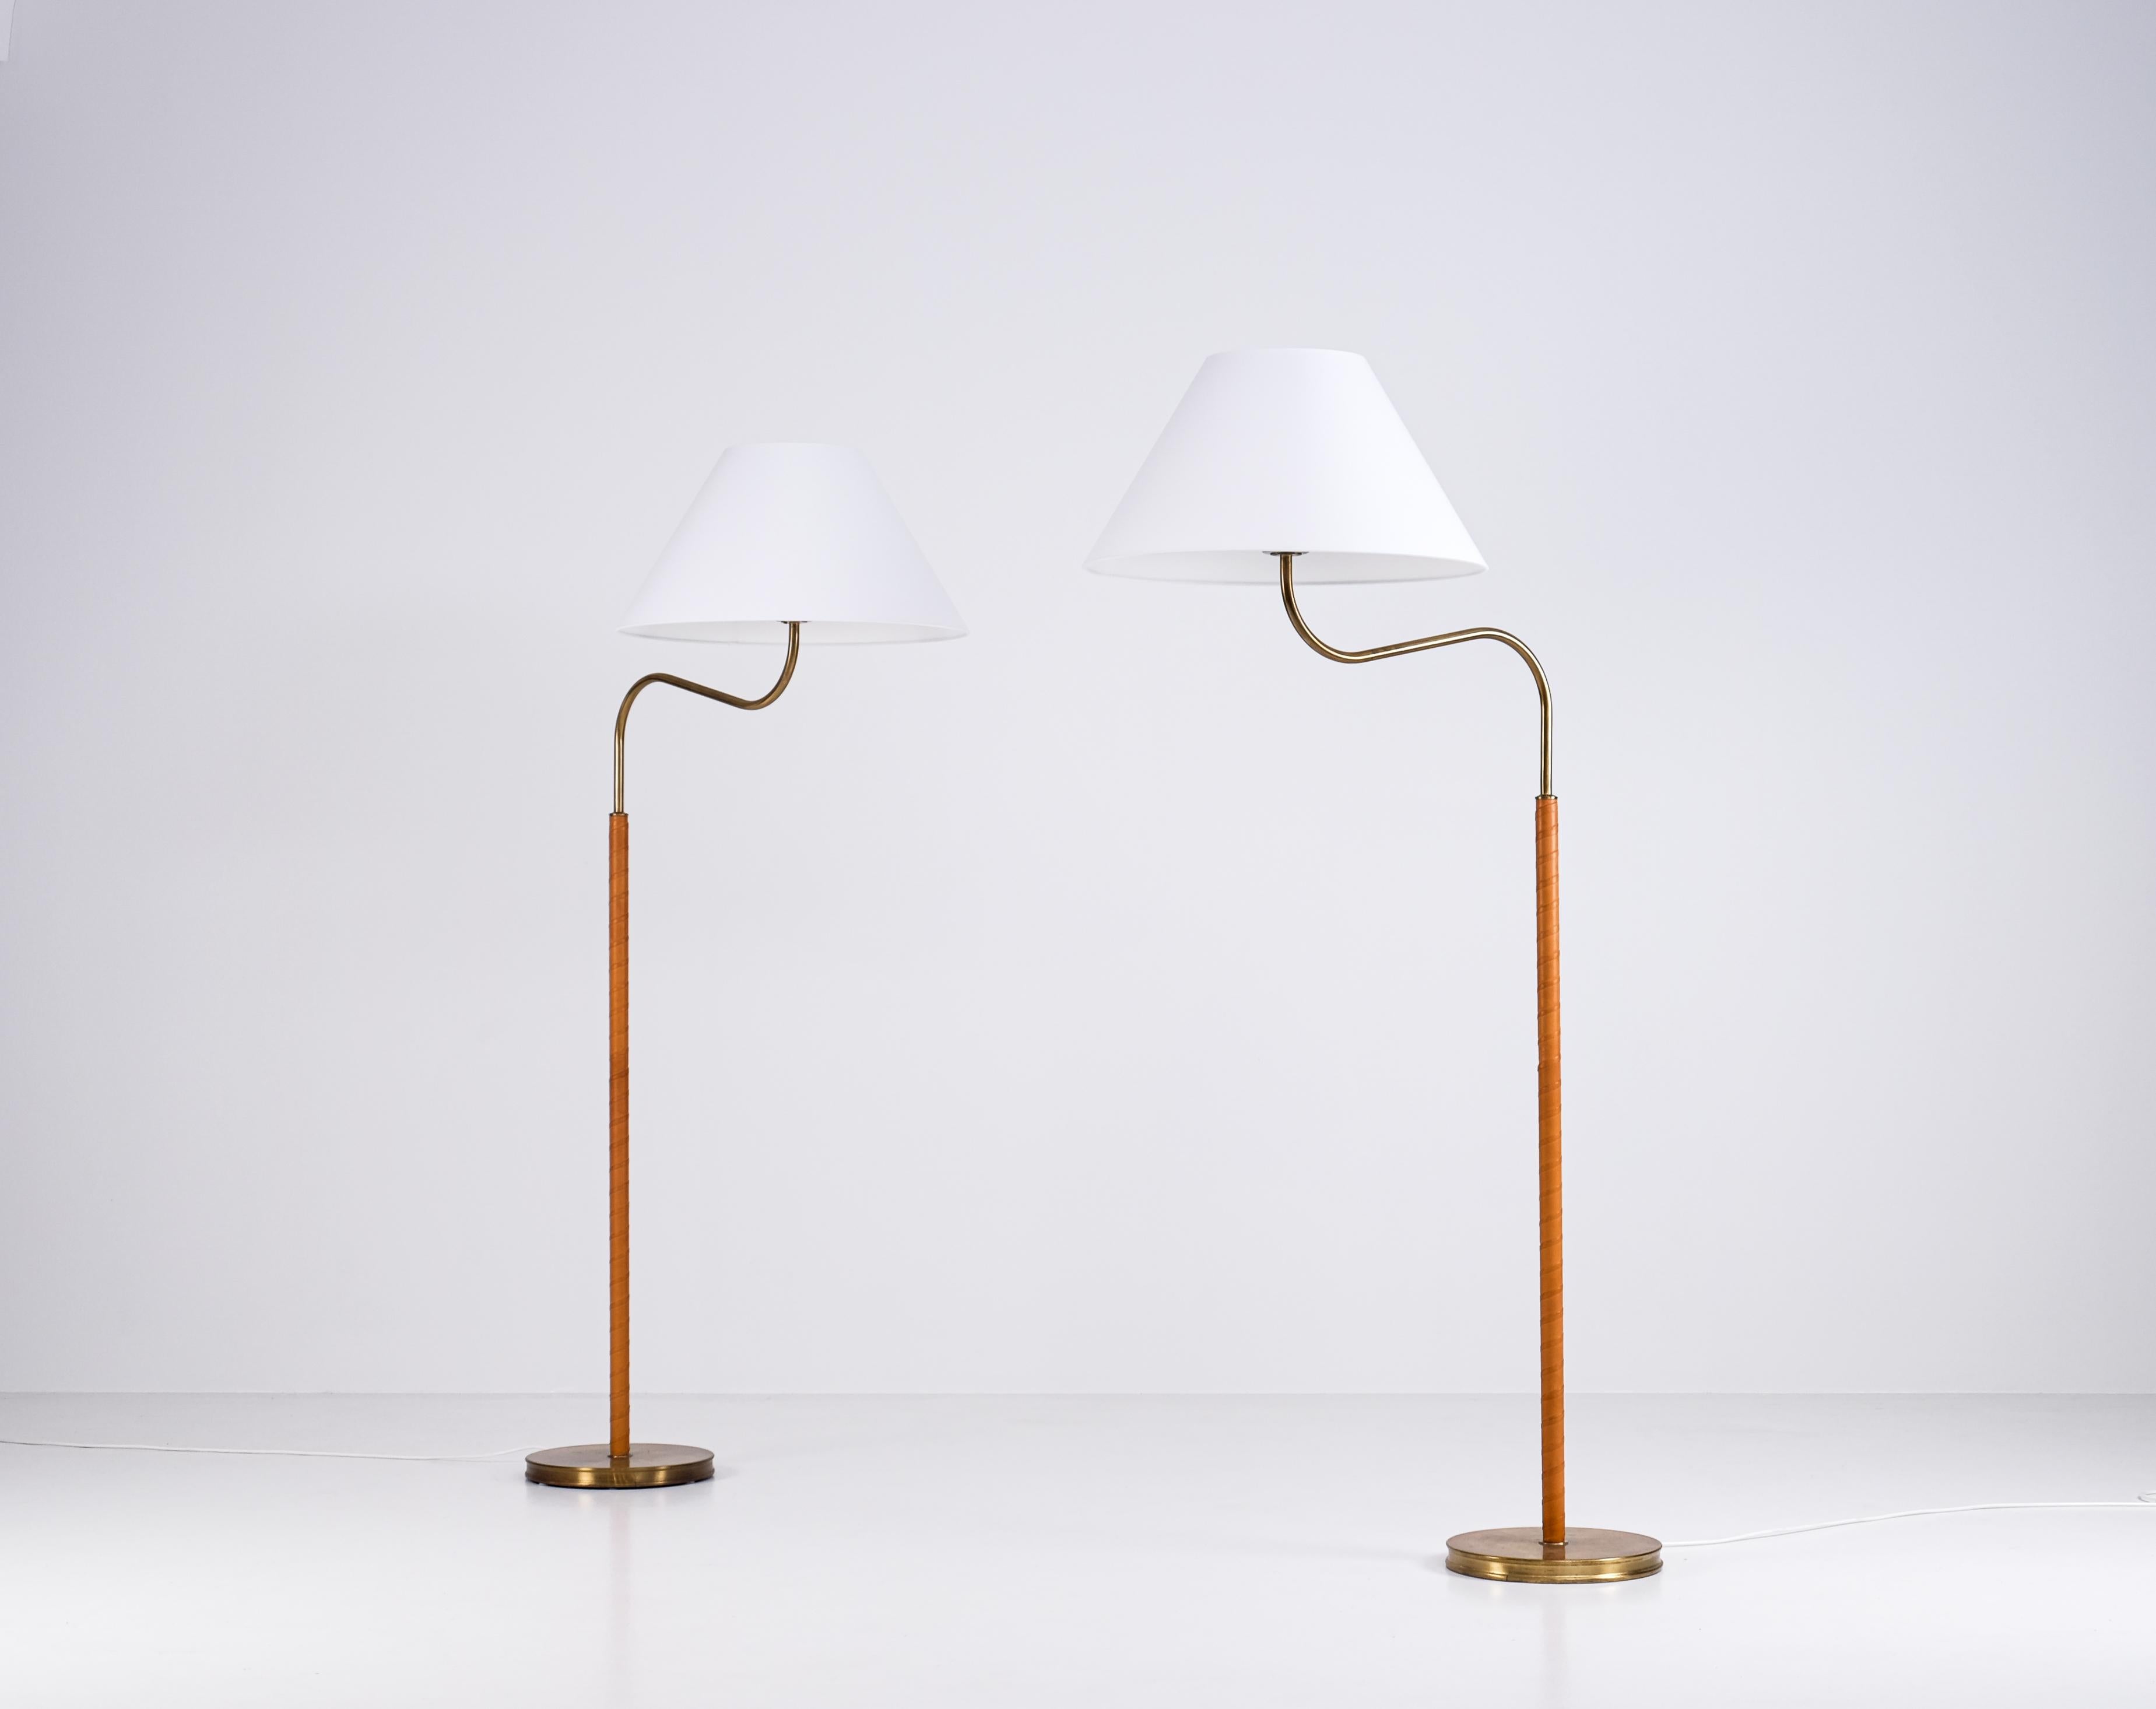 Brass Pair of 'Large Camel' Floor Lamps by Josef Frank, Sweden, 1960s For Sale